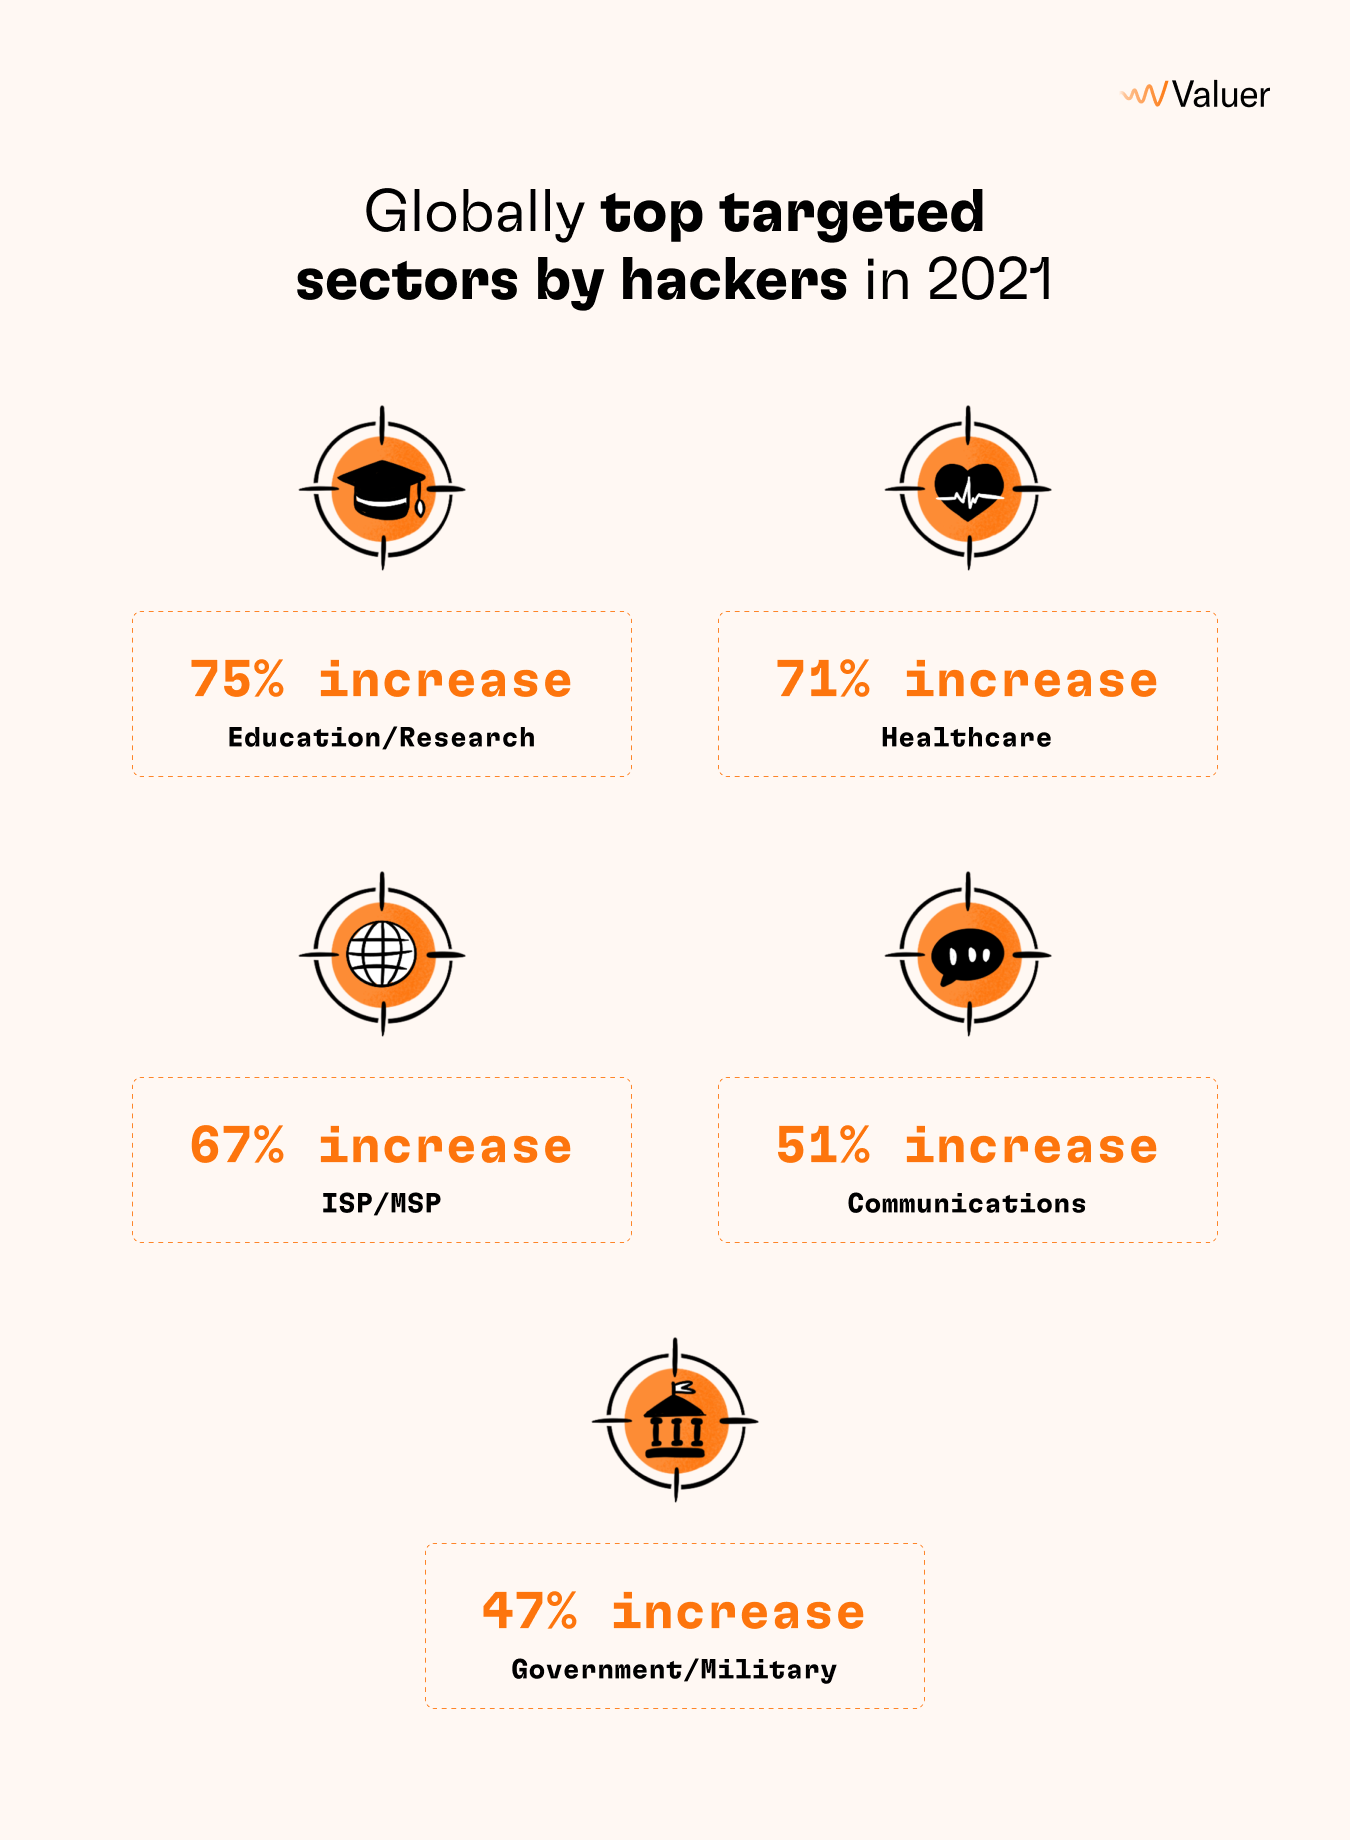 Globally top targeted sectors by hackers in 2021